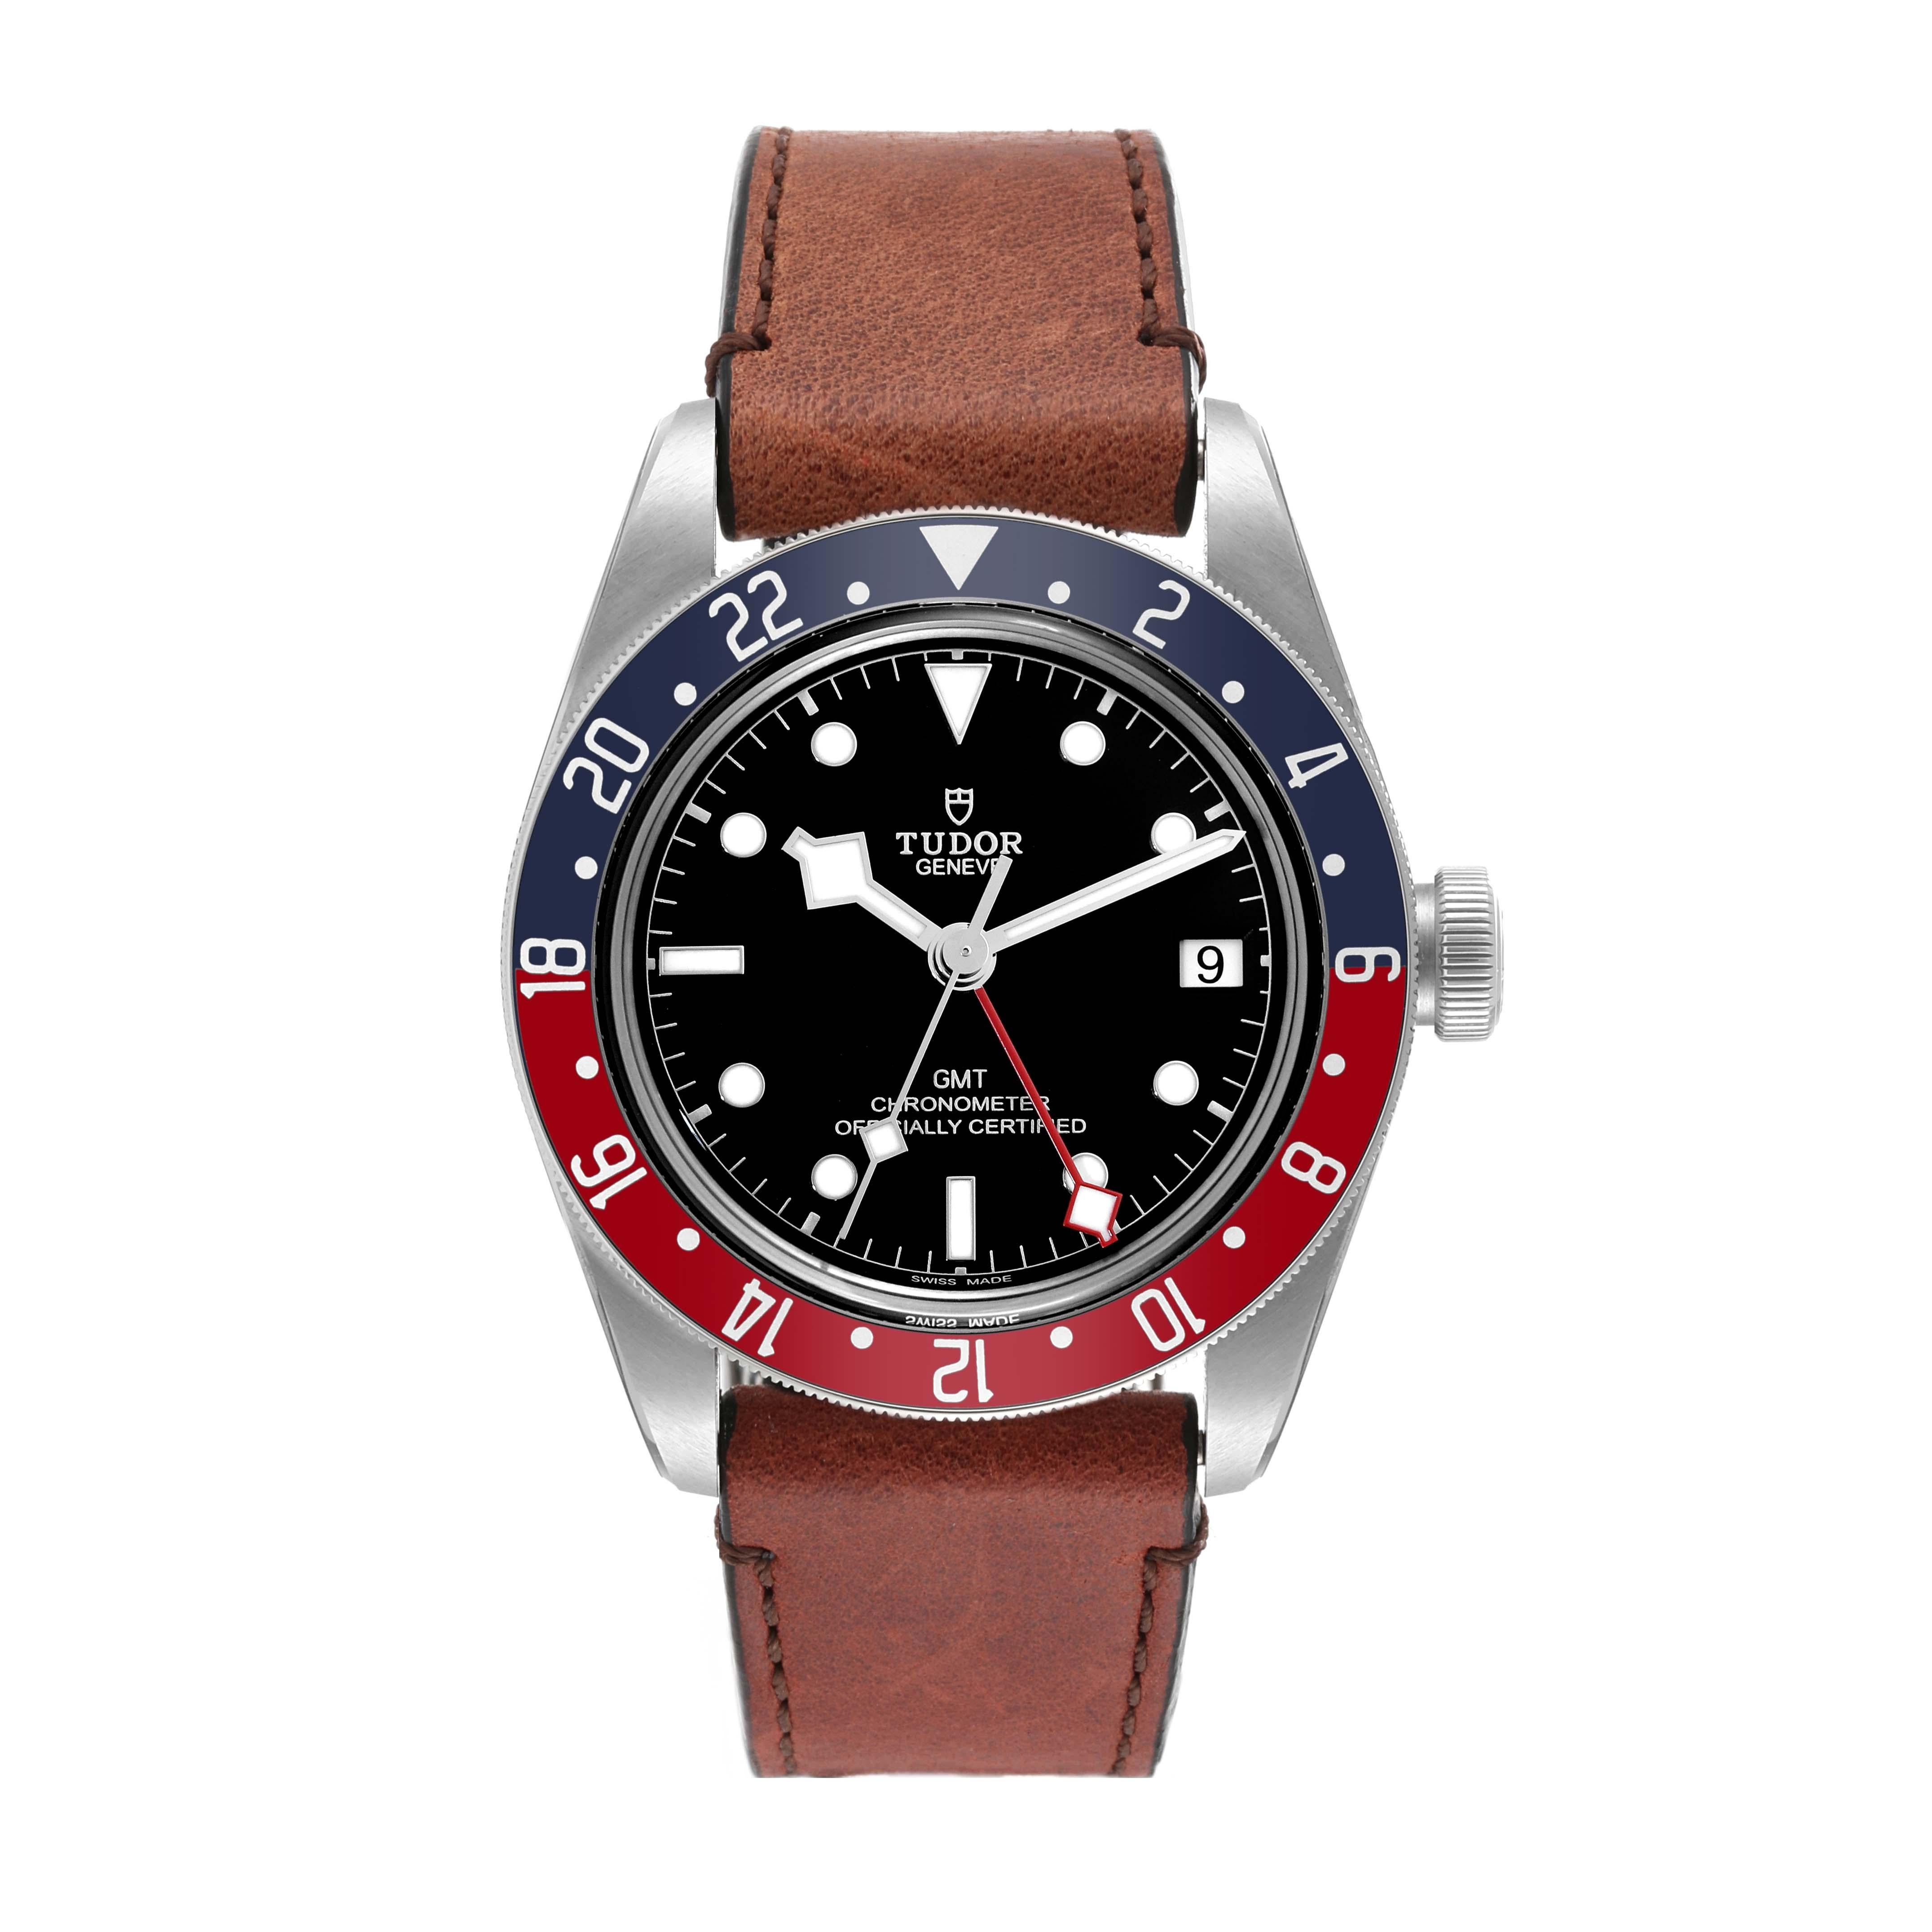 Tudor Heritage Black Bay GMT Pepsi Bezel Steel Mens Watch 79830RB Box Card. Automatic self-winding movement. Stainless steel oyster case 41.0 mm in diameter. Tudor logo on a crown. Bidirectional rotating red and blue (Pepsi) bezel. Scratch resistant